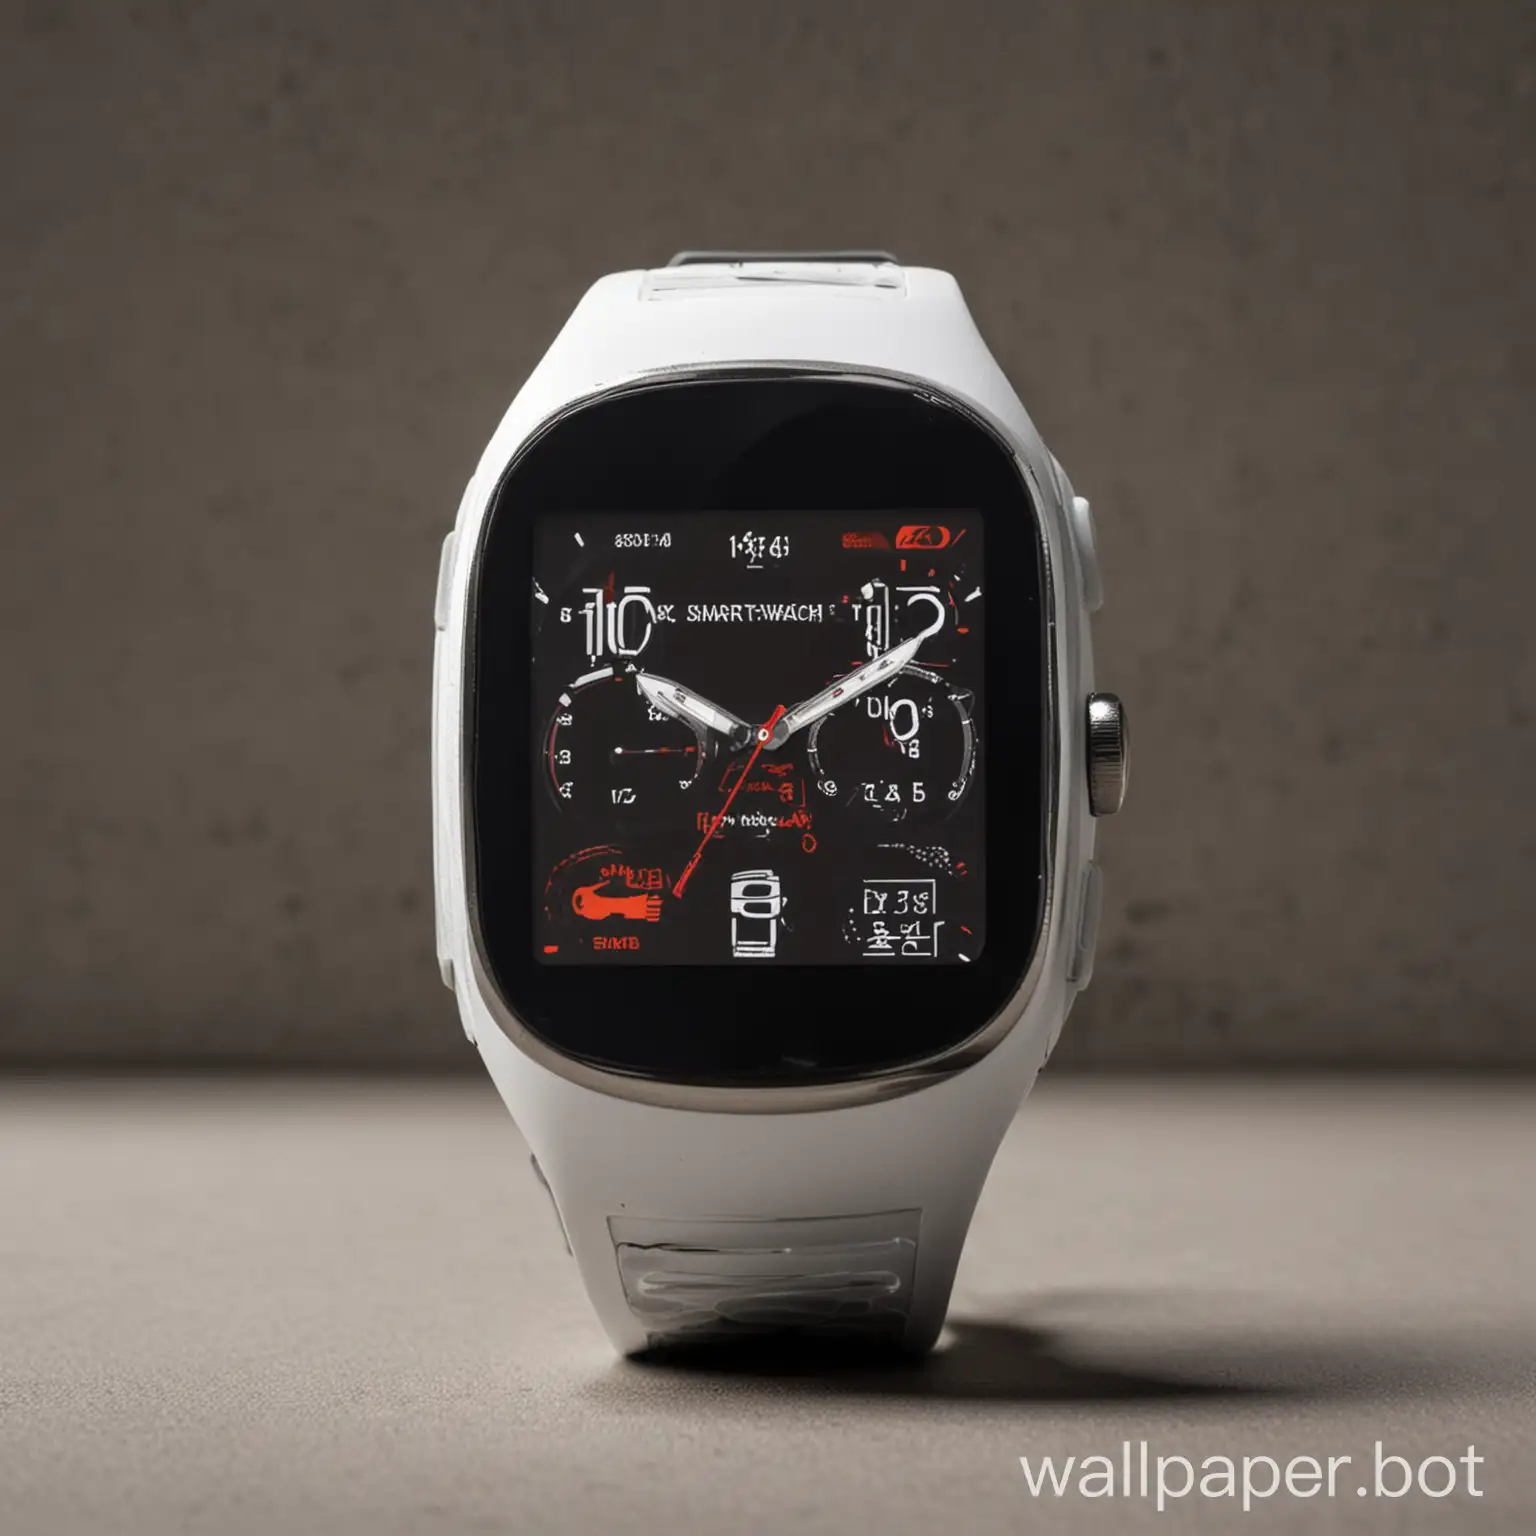 Realistic-Wallpaper-Fastrack-Smart-Watch-Contemporary-Accessory-on-Vibrant-Background